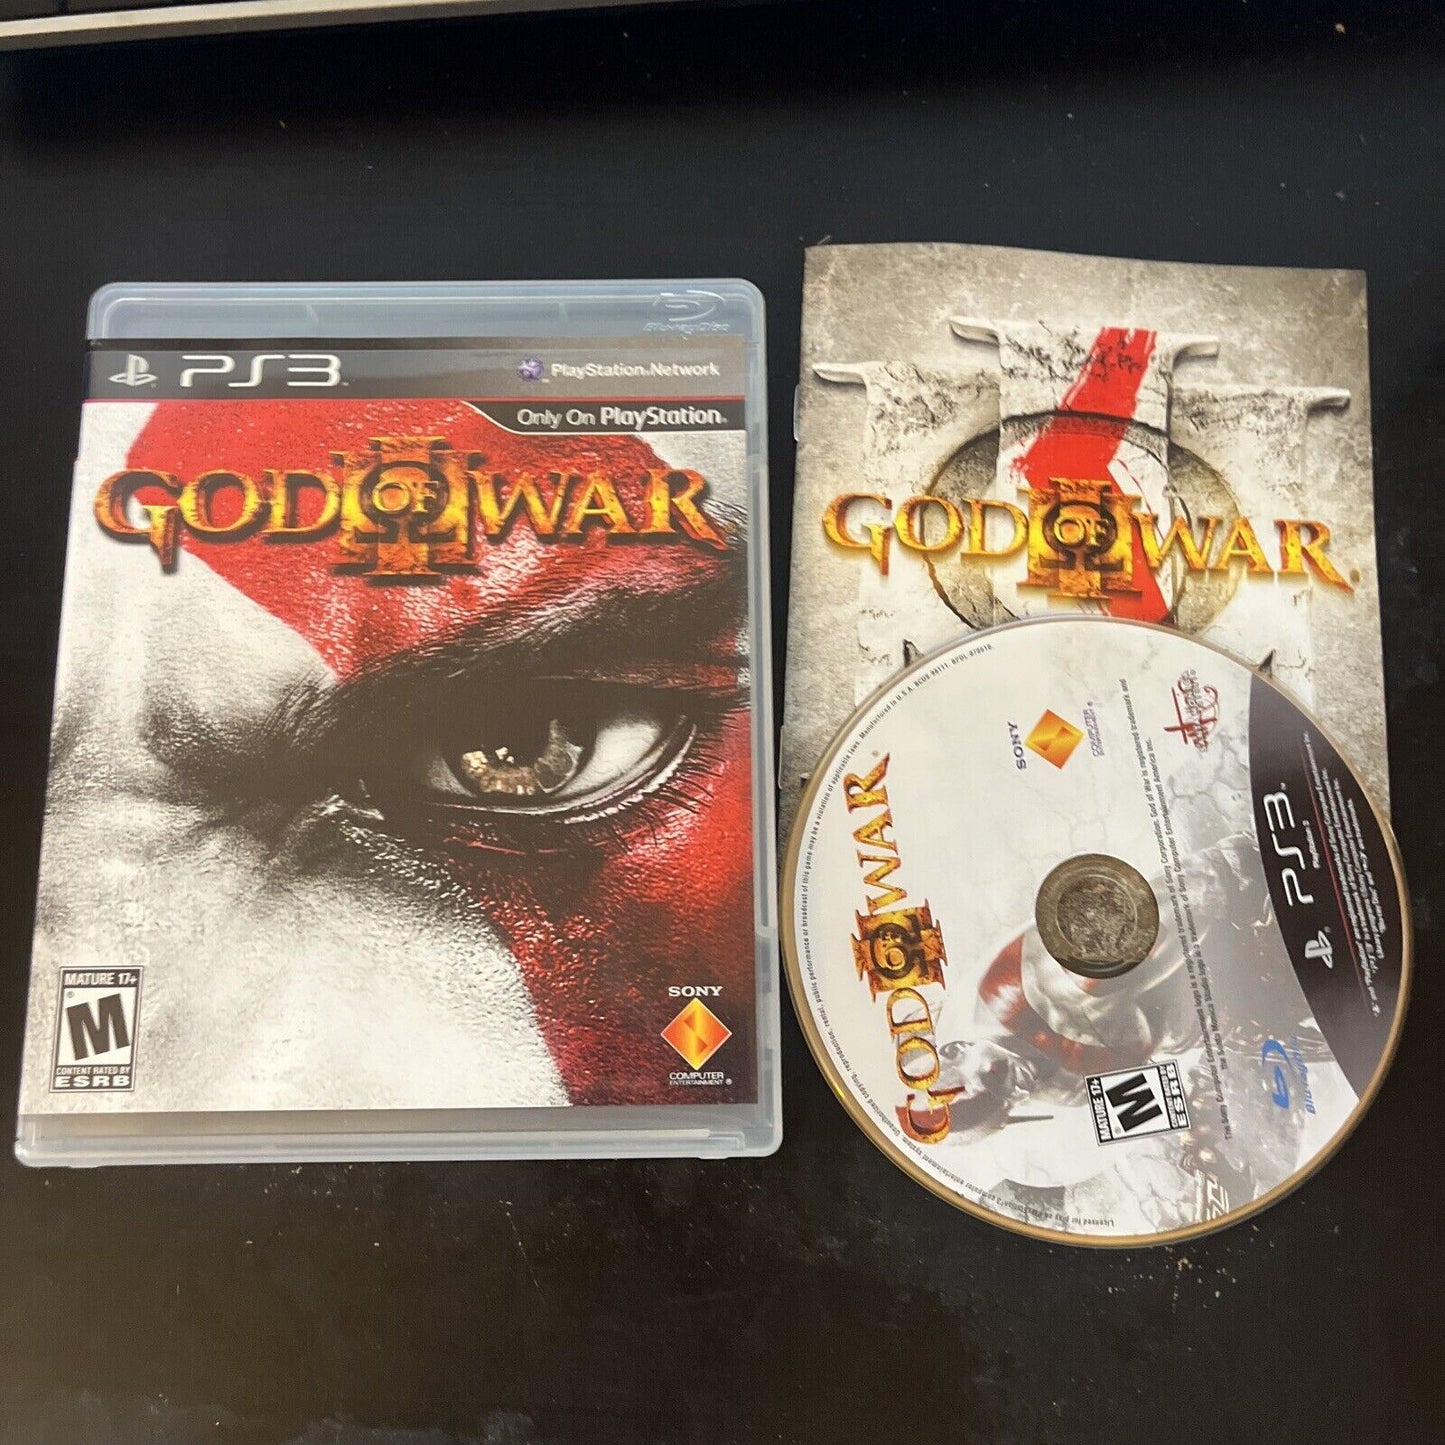 God of War III (3) - Sony Playstion 3 PS3 Game with Manual